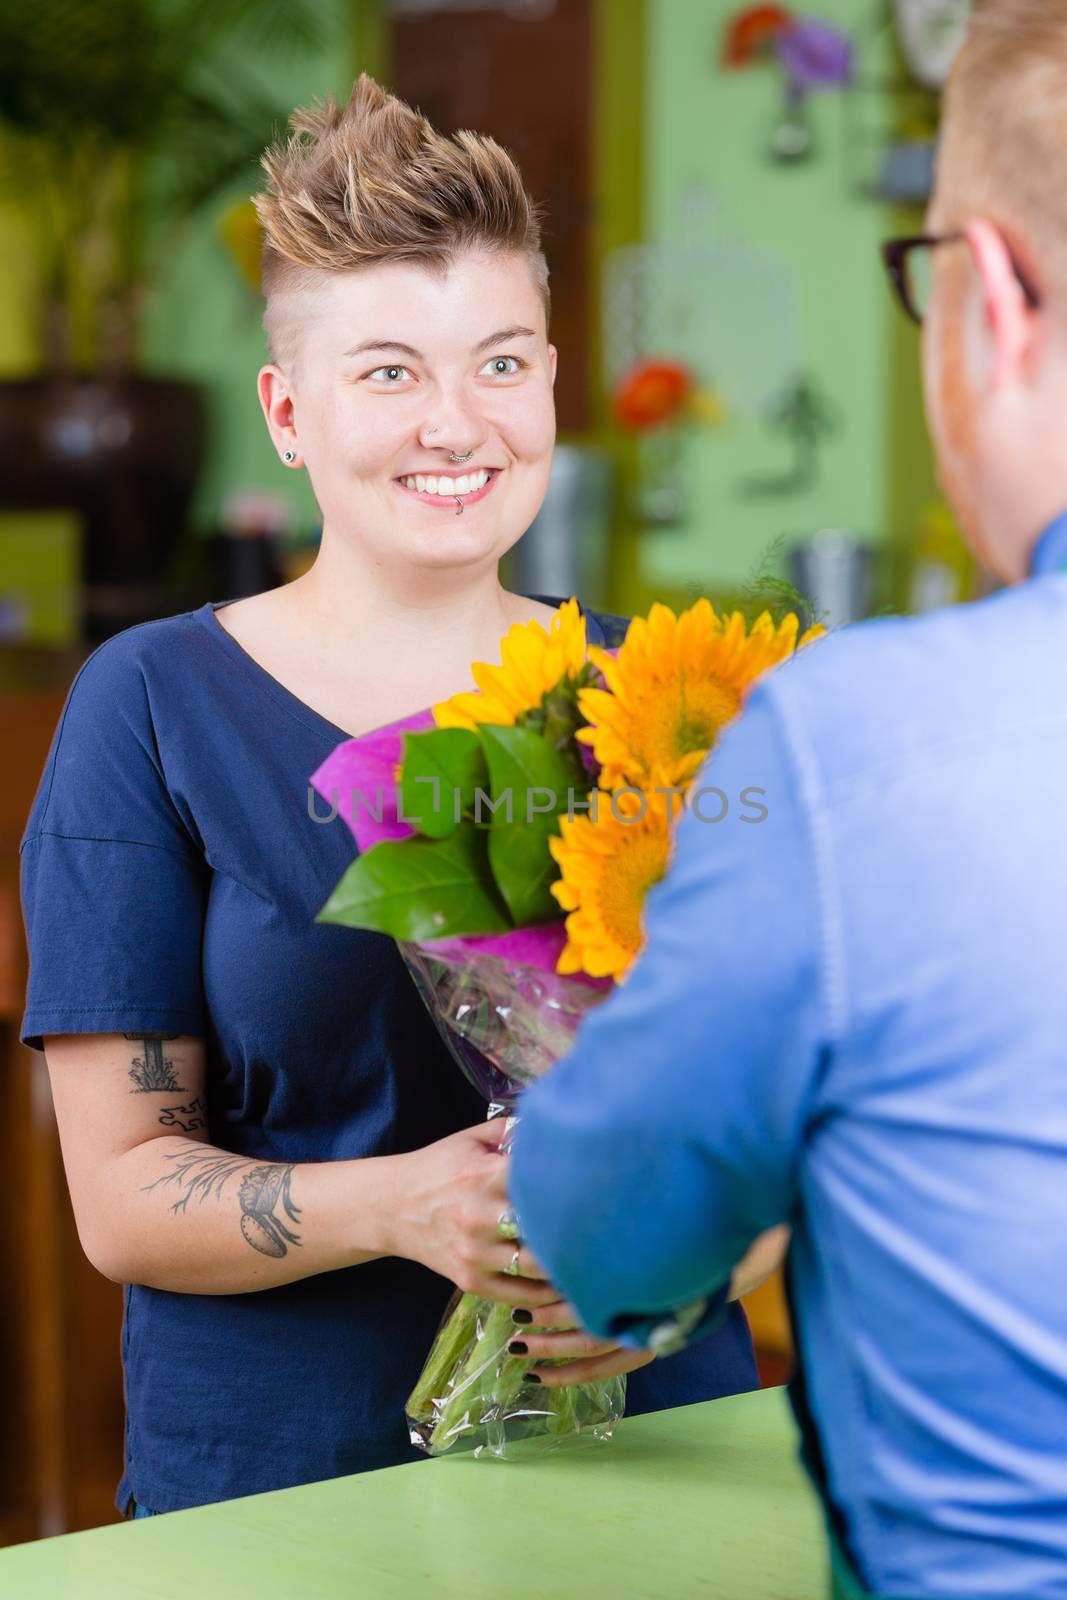 Cute Woman in Flower Shop Purchases Sunflowers by Creatista